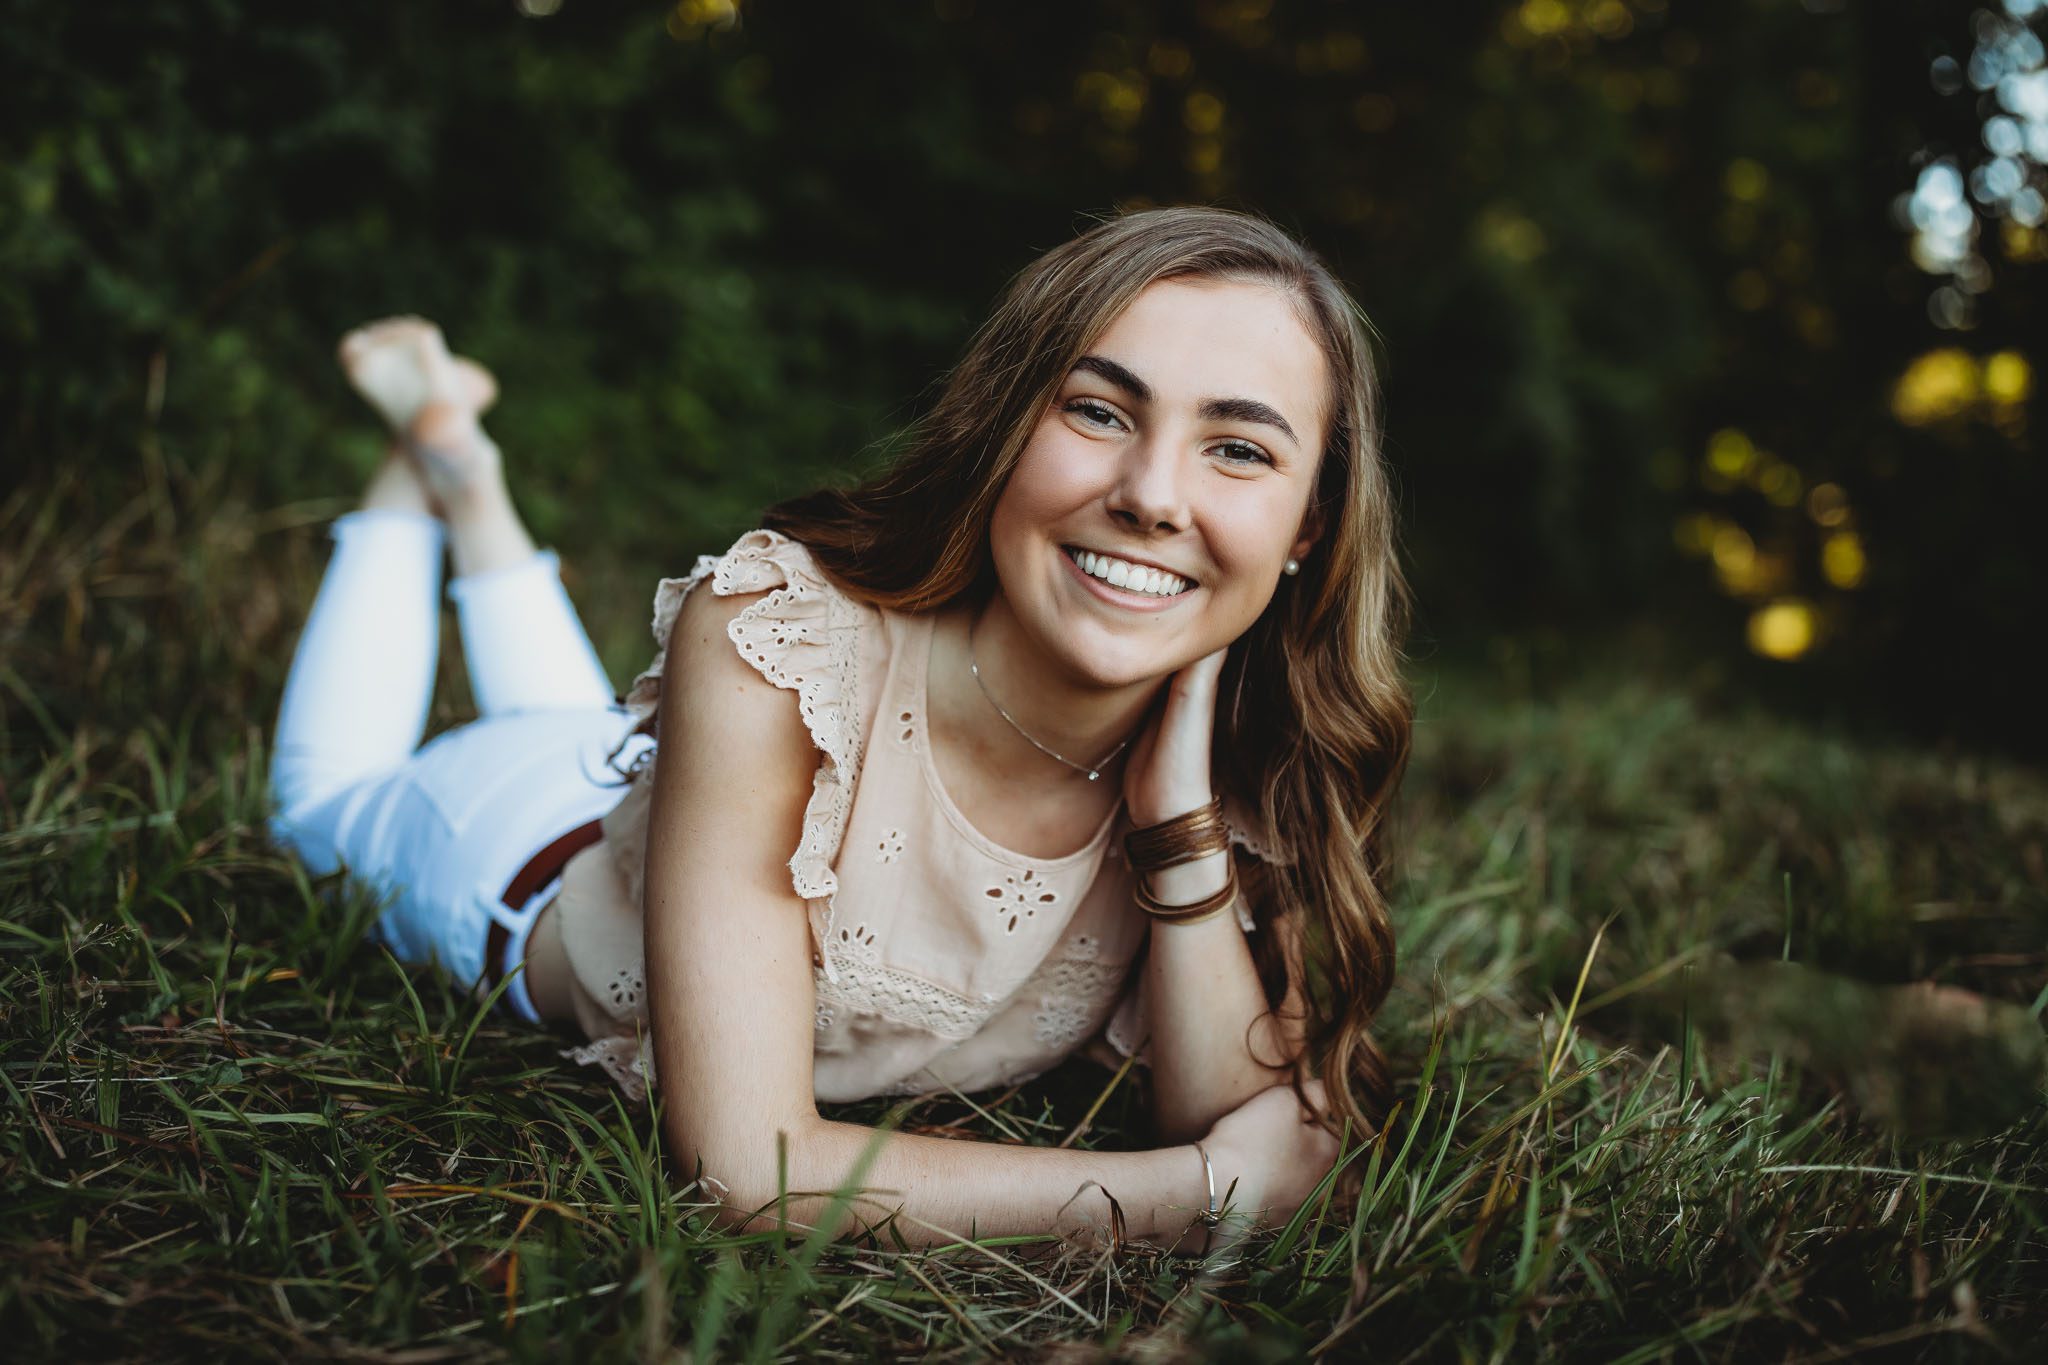 Senior portrait of a young woman laying in a field of grass at sunset in Massachusetts photographed by Sean Wytrwal of J&S Photography